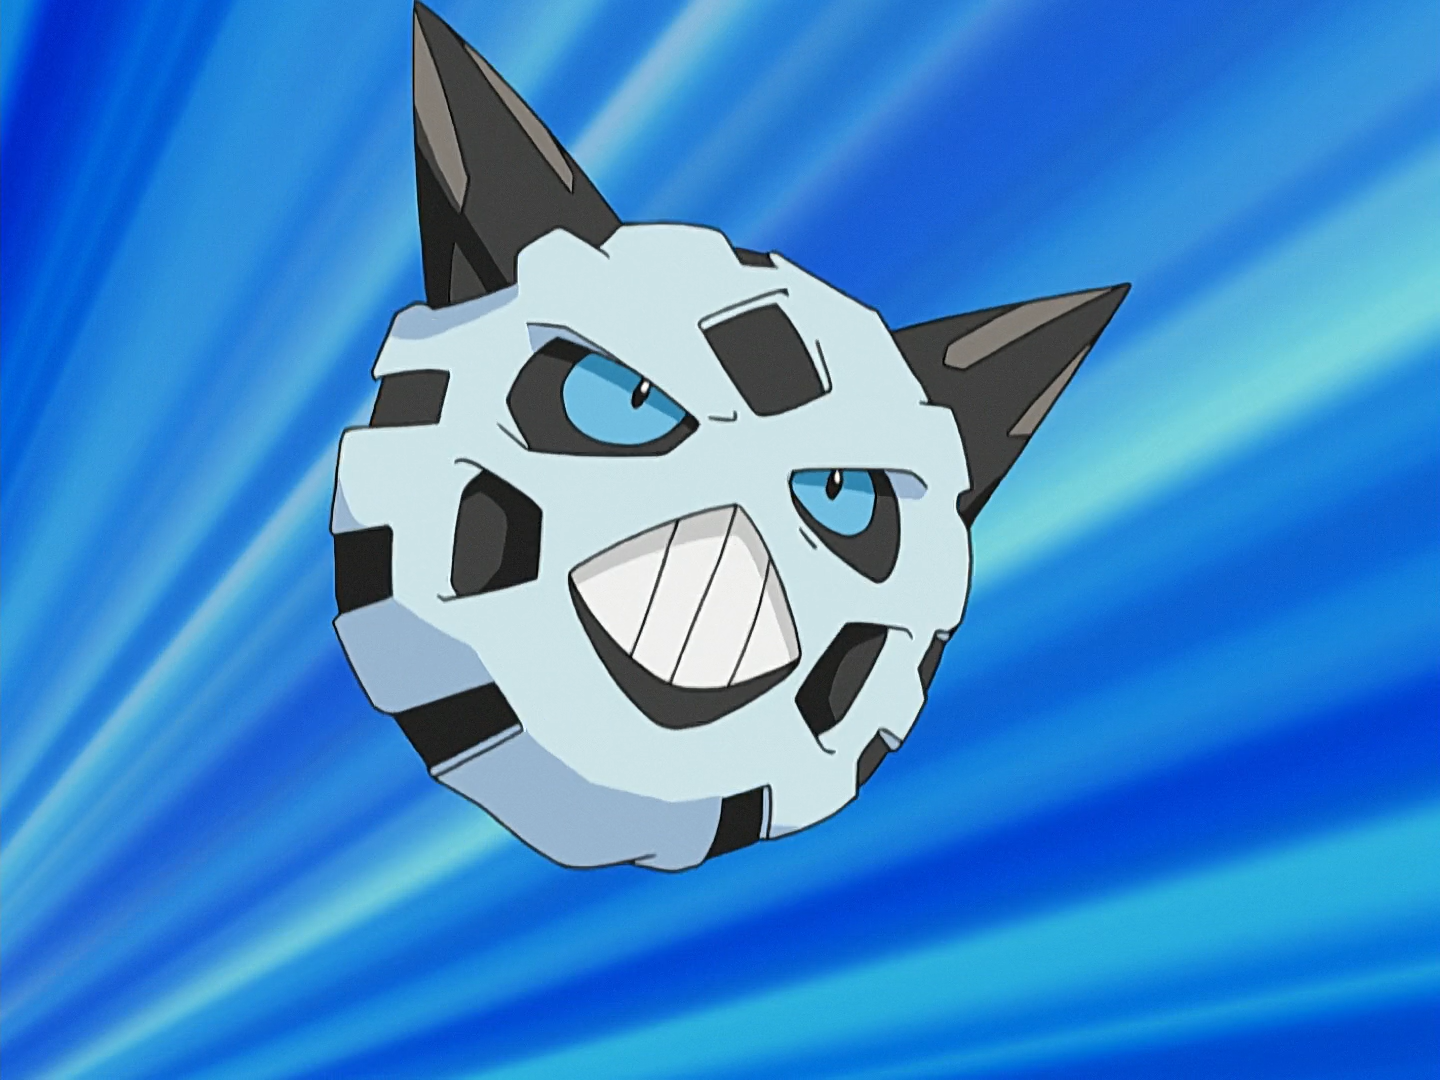 This Glalie is an ice-type Pokémon owned by the poacher from The Drifting S...